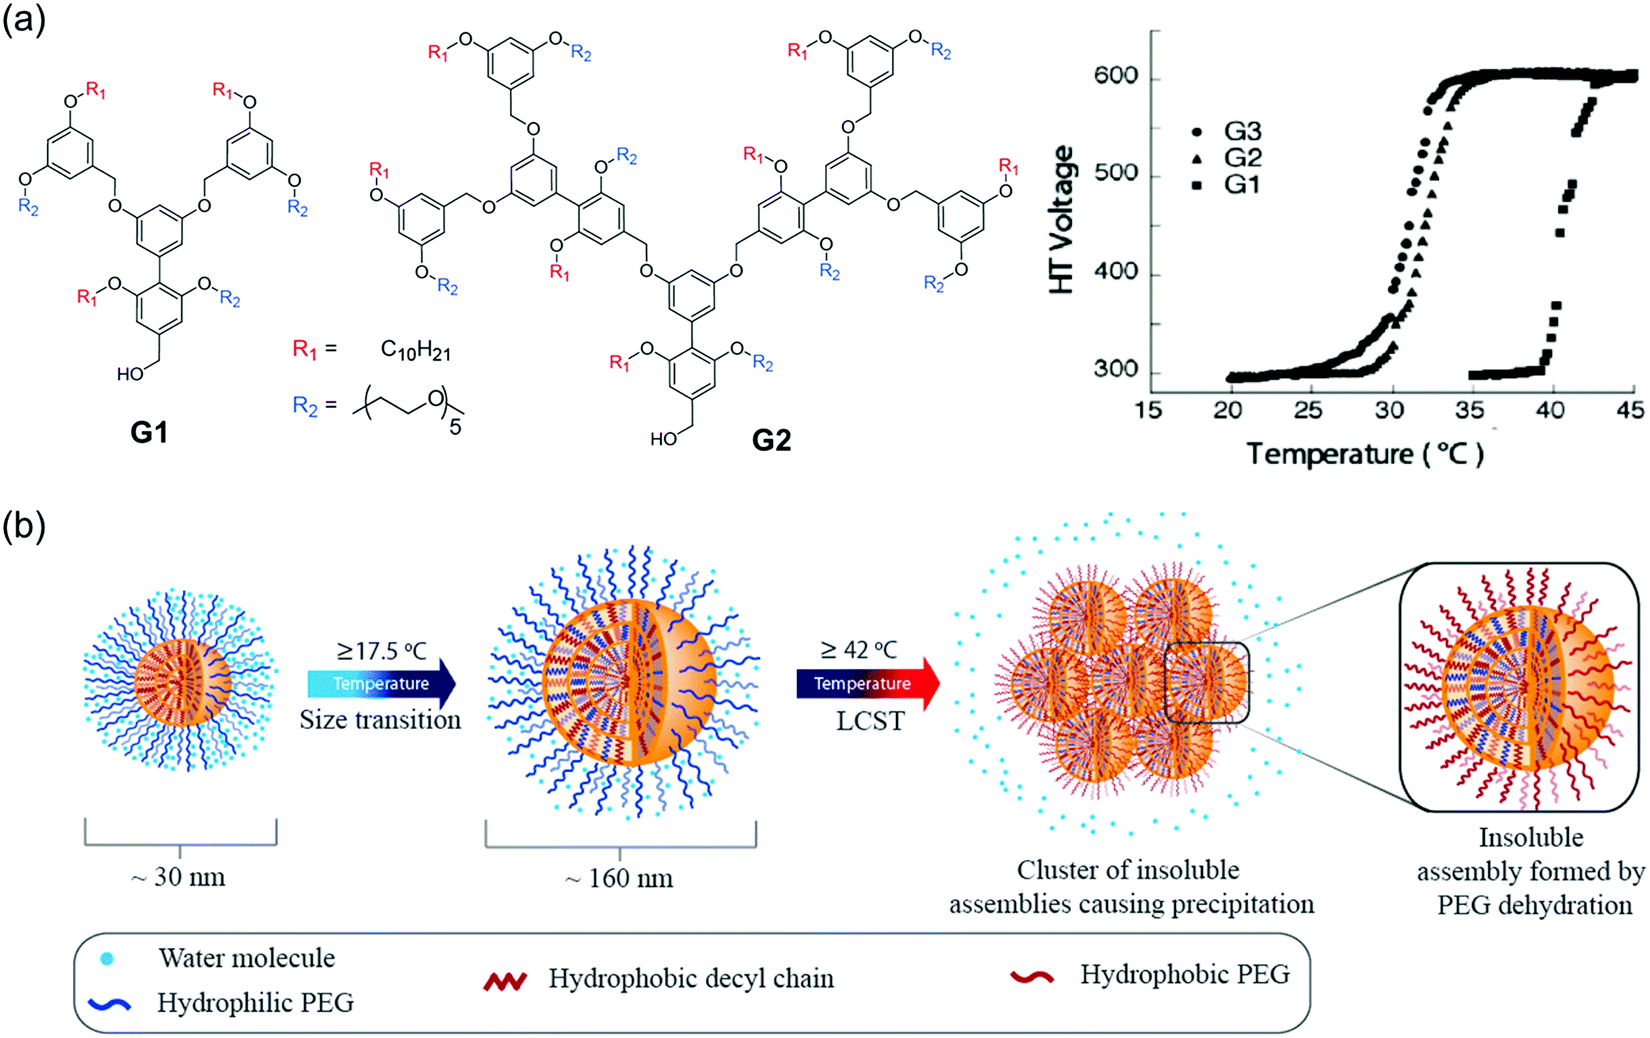 Molecular bases for temperature sensitivity in supramolecular assemblies  and their applications as thermoresponsive soft materials - Materials  Horizons (RSC Publishing) DOI:10.1039/D1MH01091C